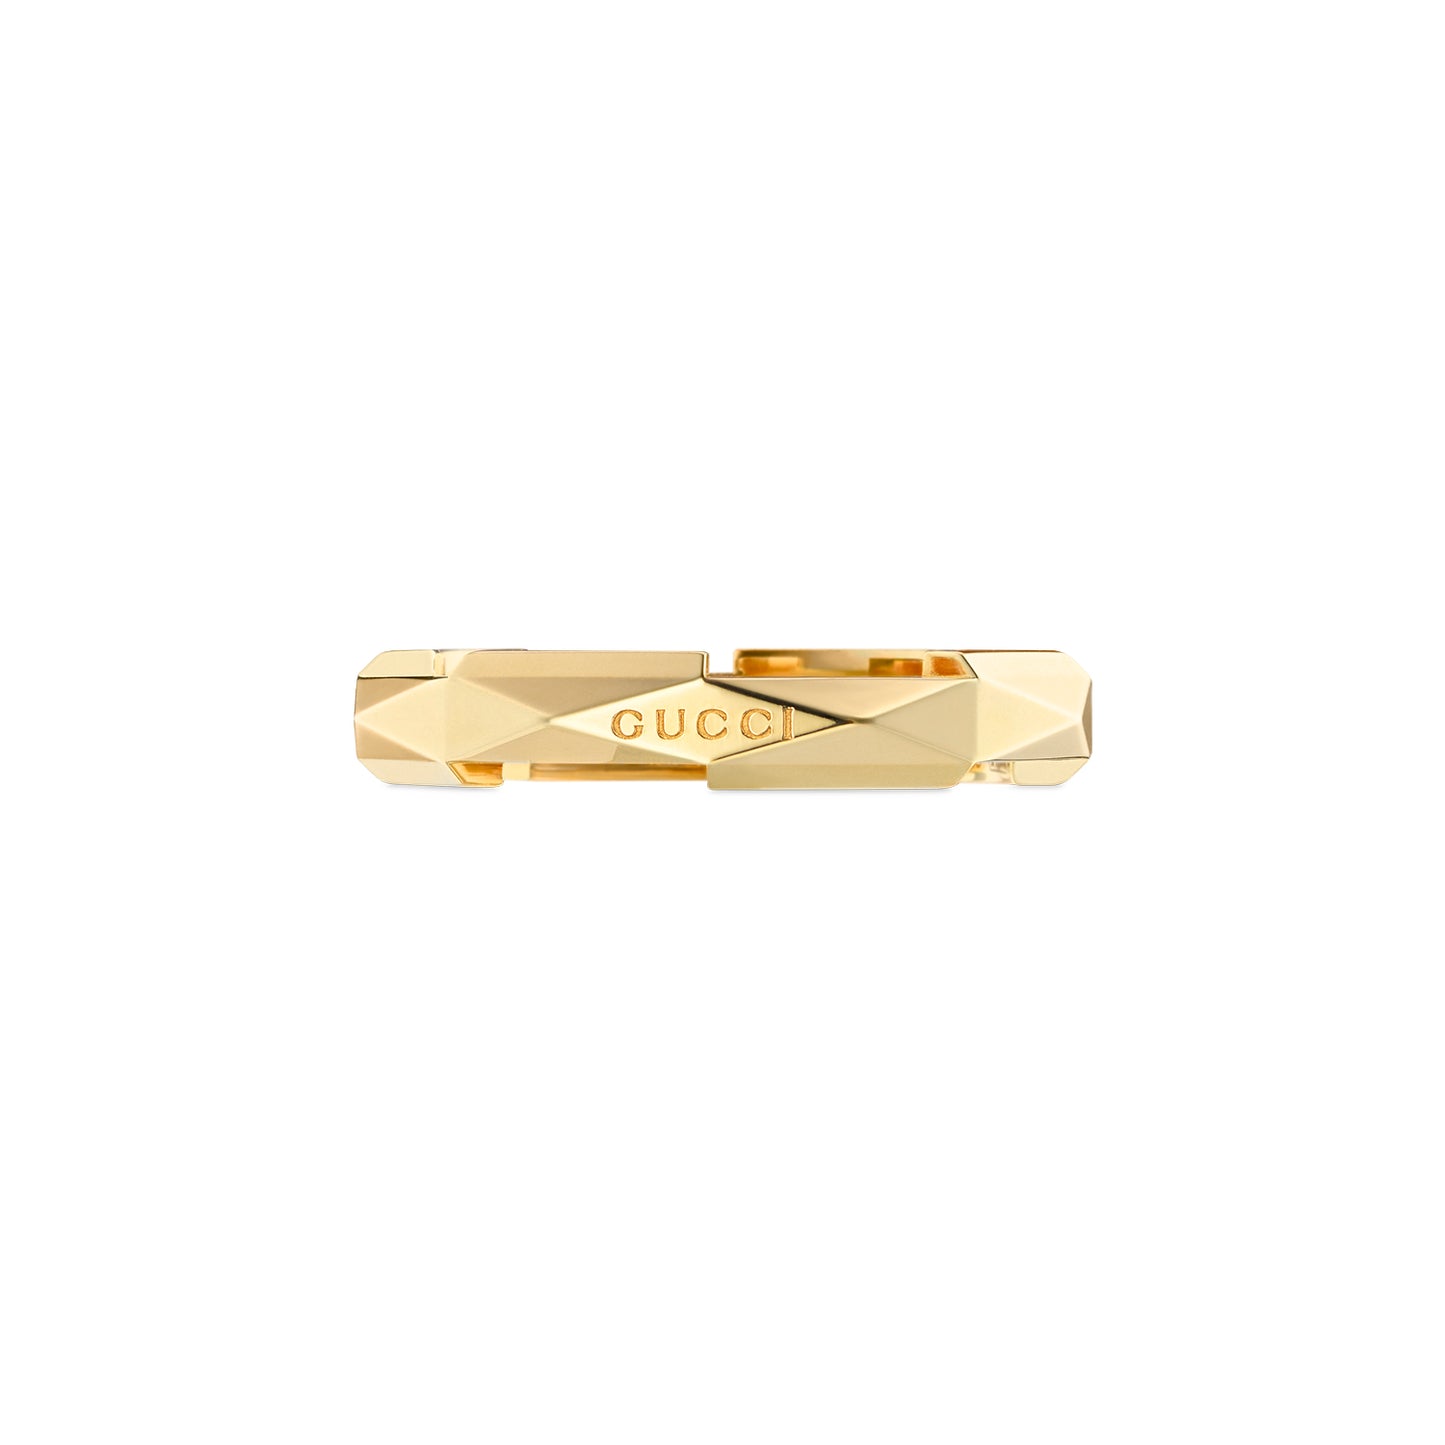 LINK TO LOVE ring